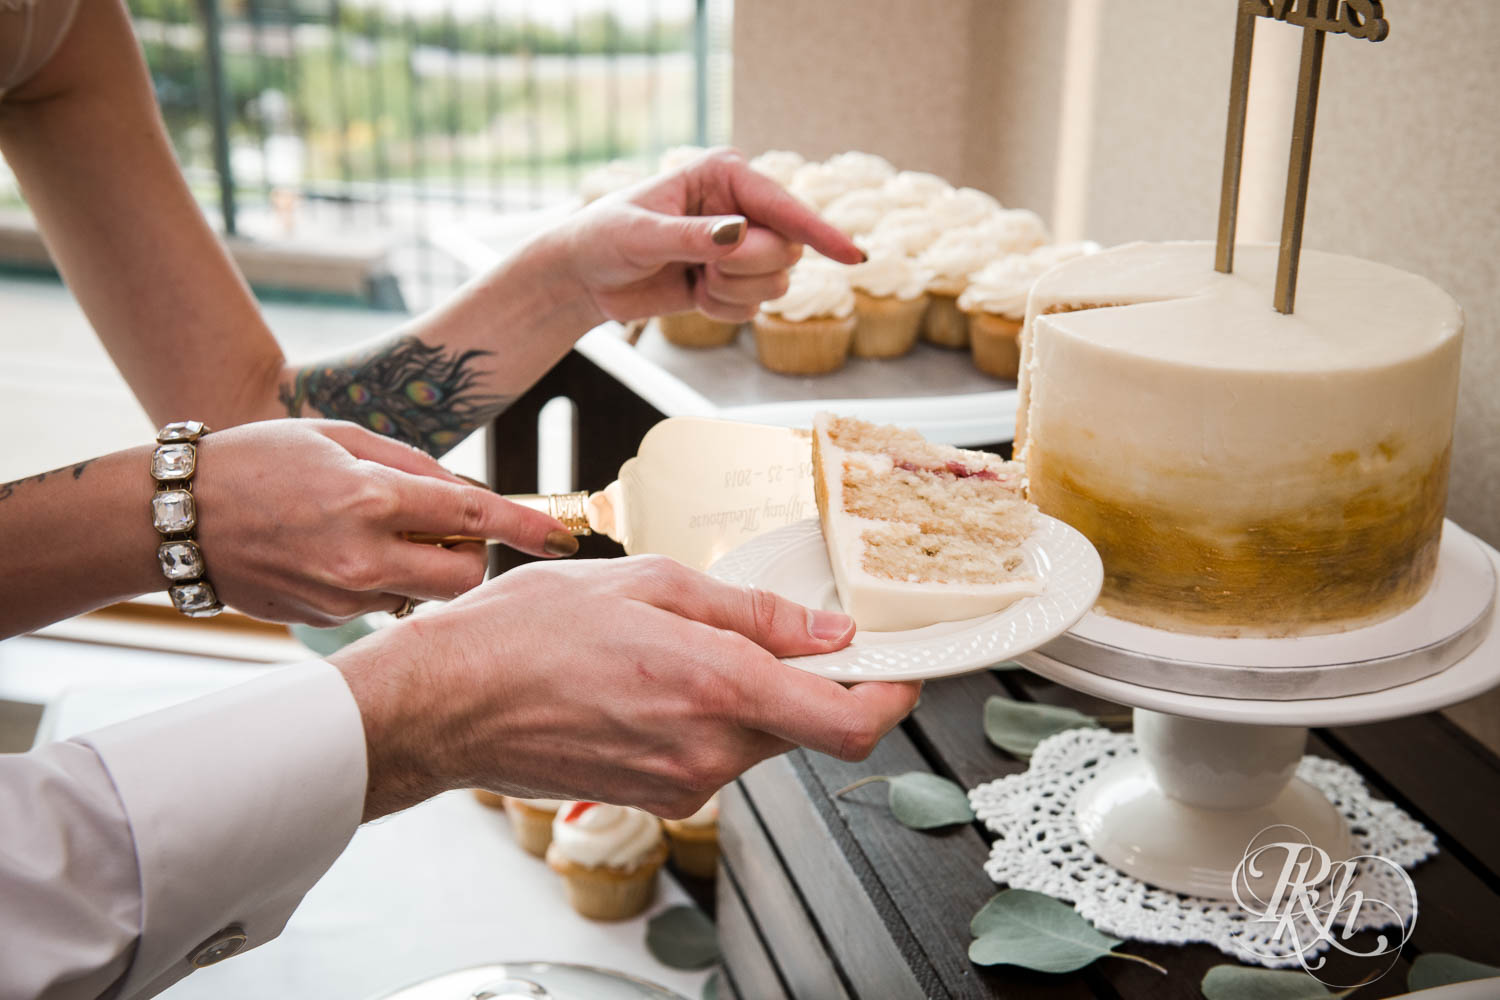 Bride and groom cut cake during wedding reception at Plymouth Creek Center in Plymouth, Minnesota.